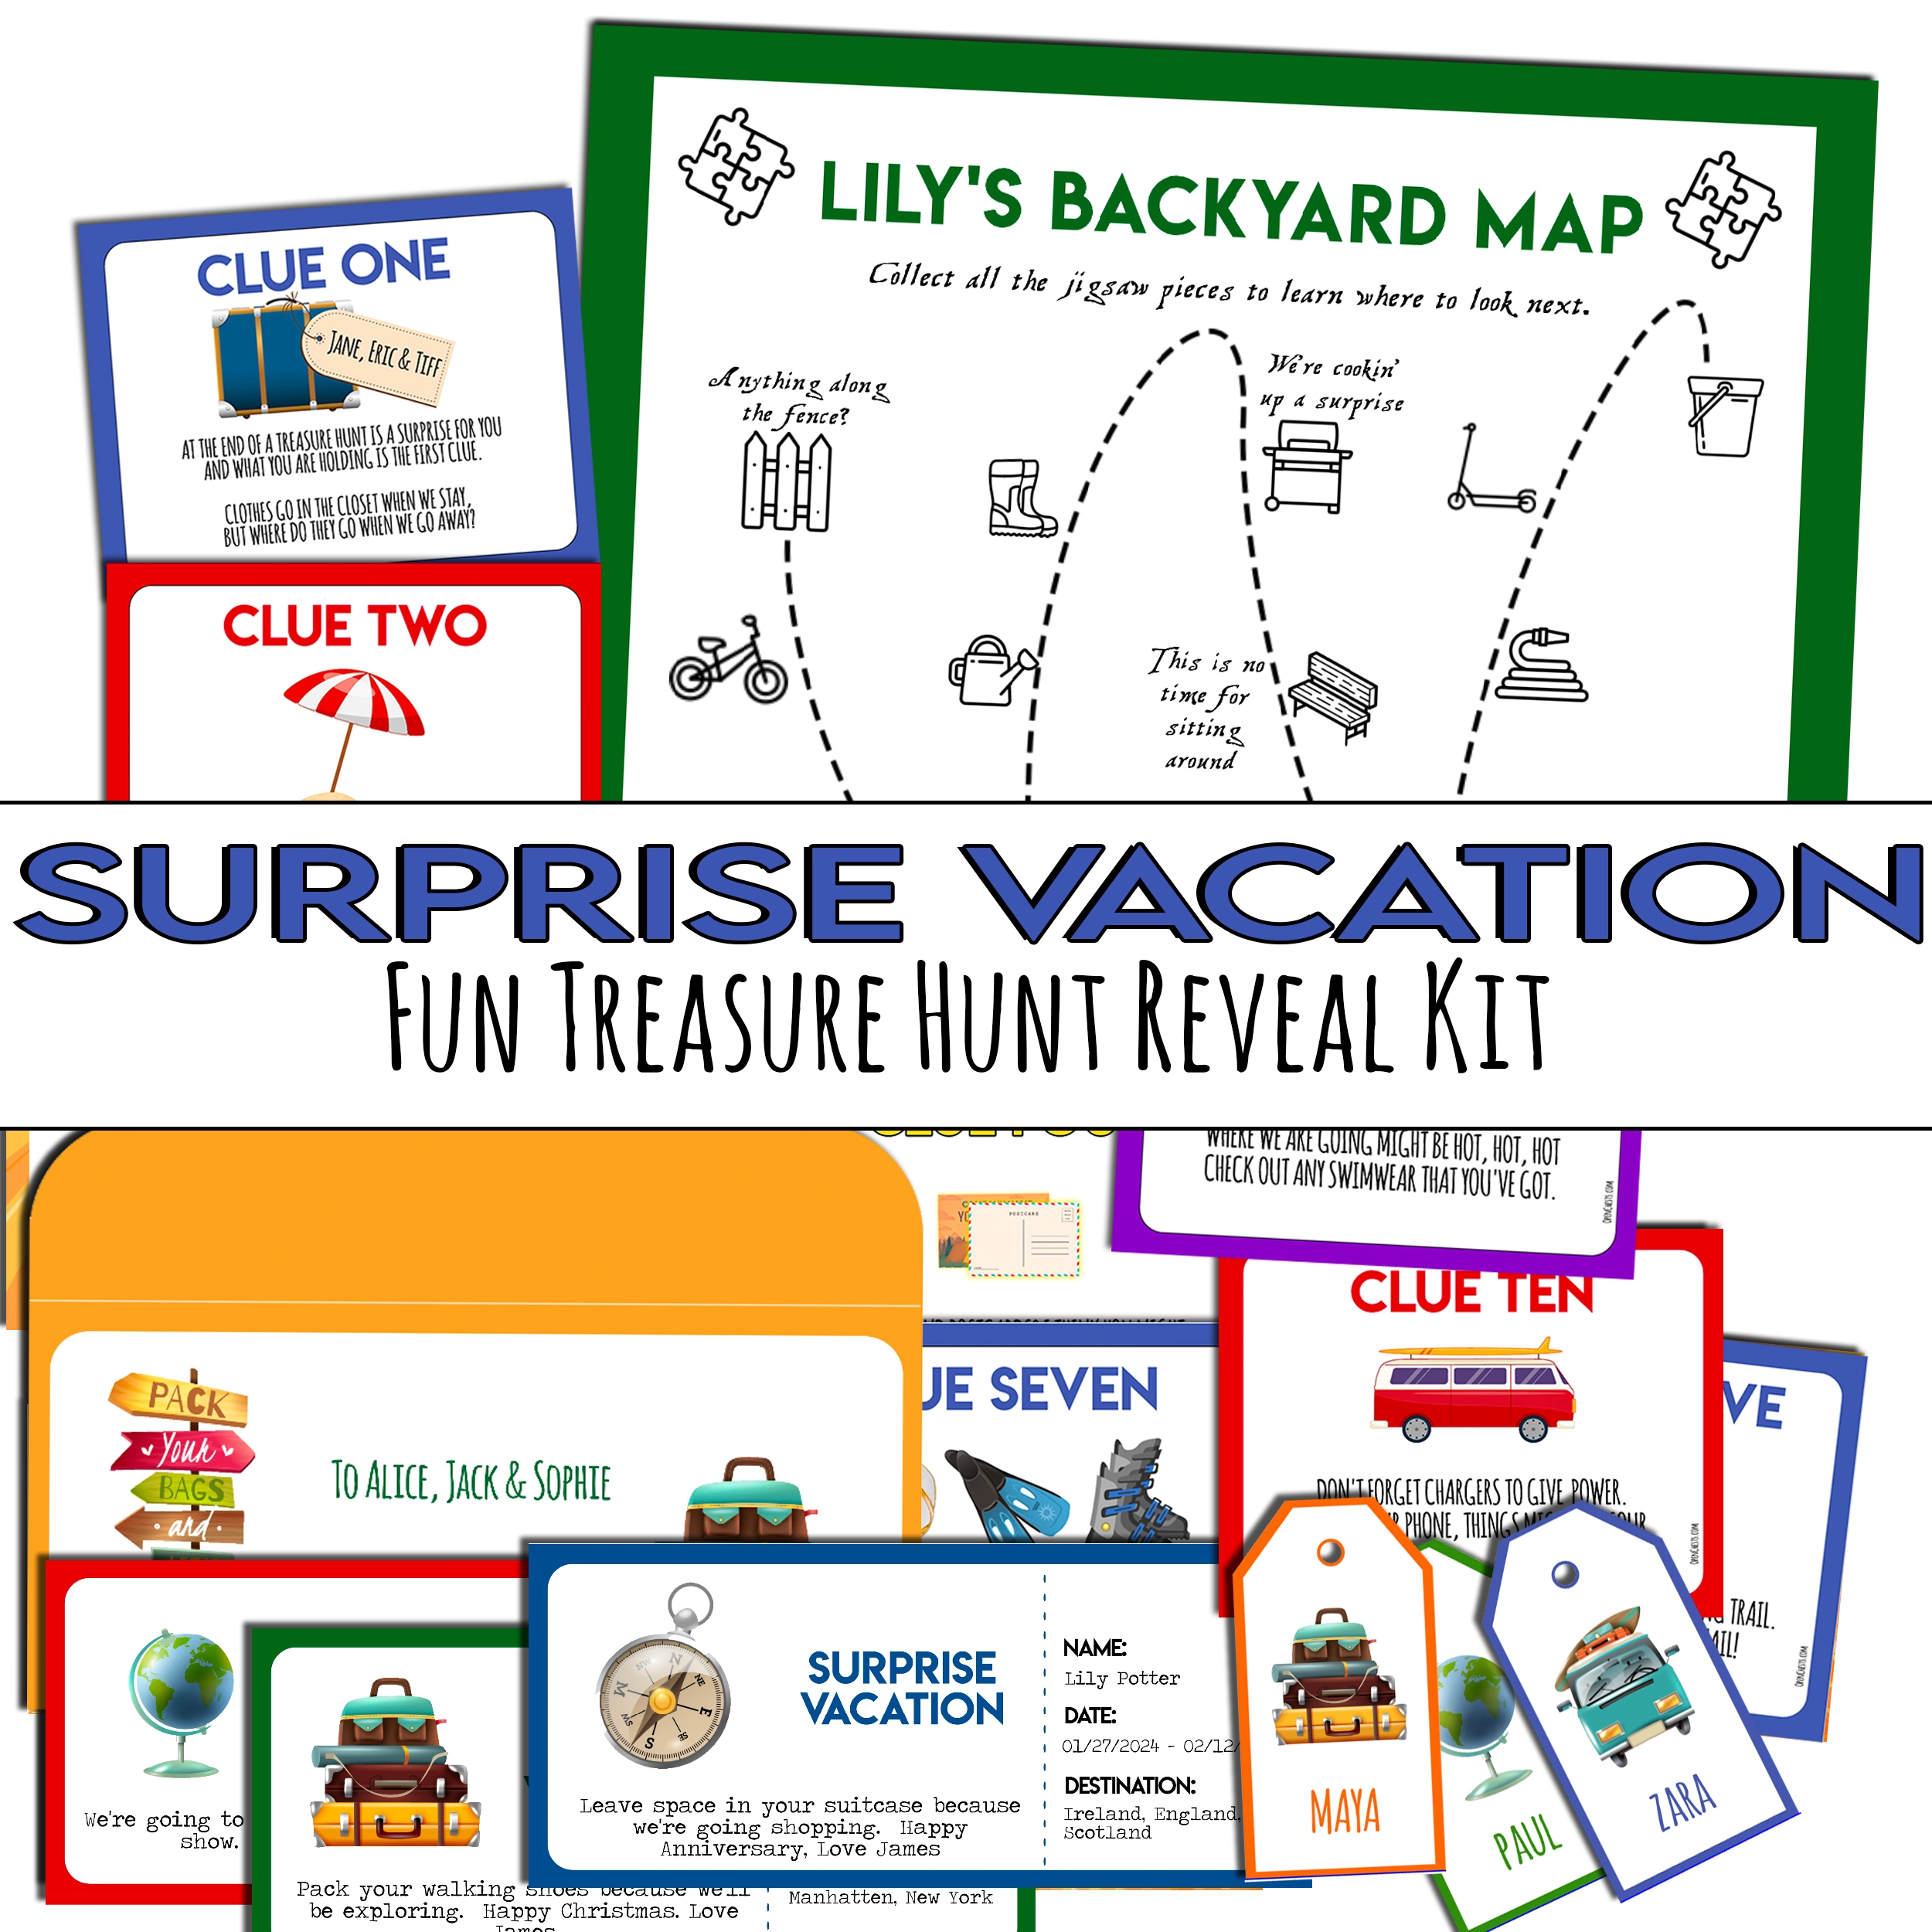 Make sure to check out our treasure hunt this weekend